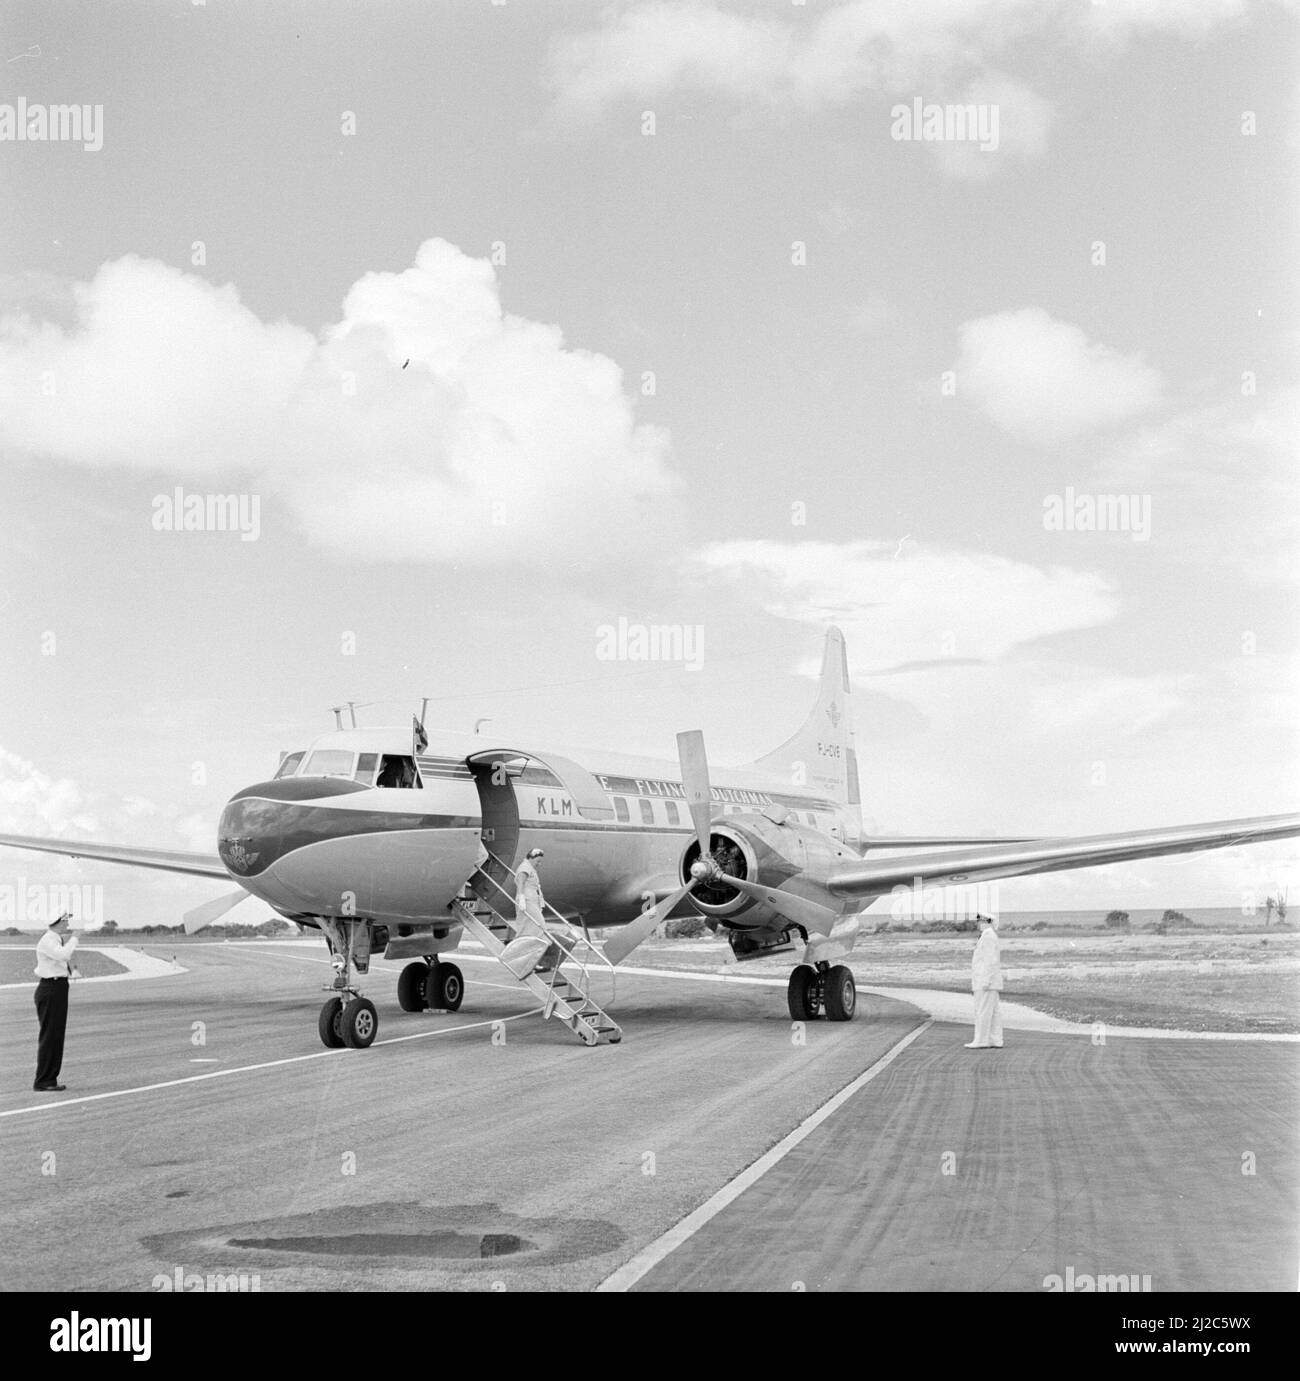 The royal plane arrives at the airport Flamingo on Bonaire ca: October 23, 1955 Stock Photo